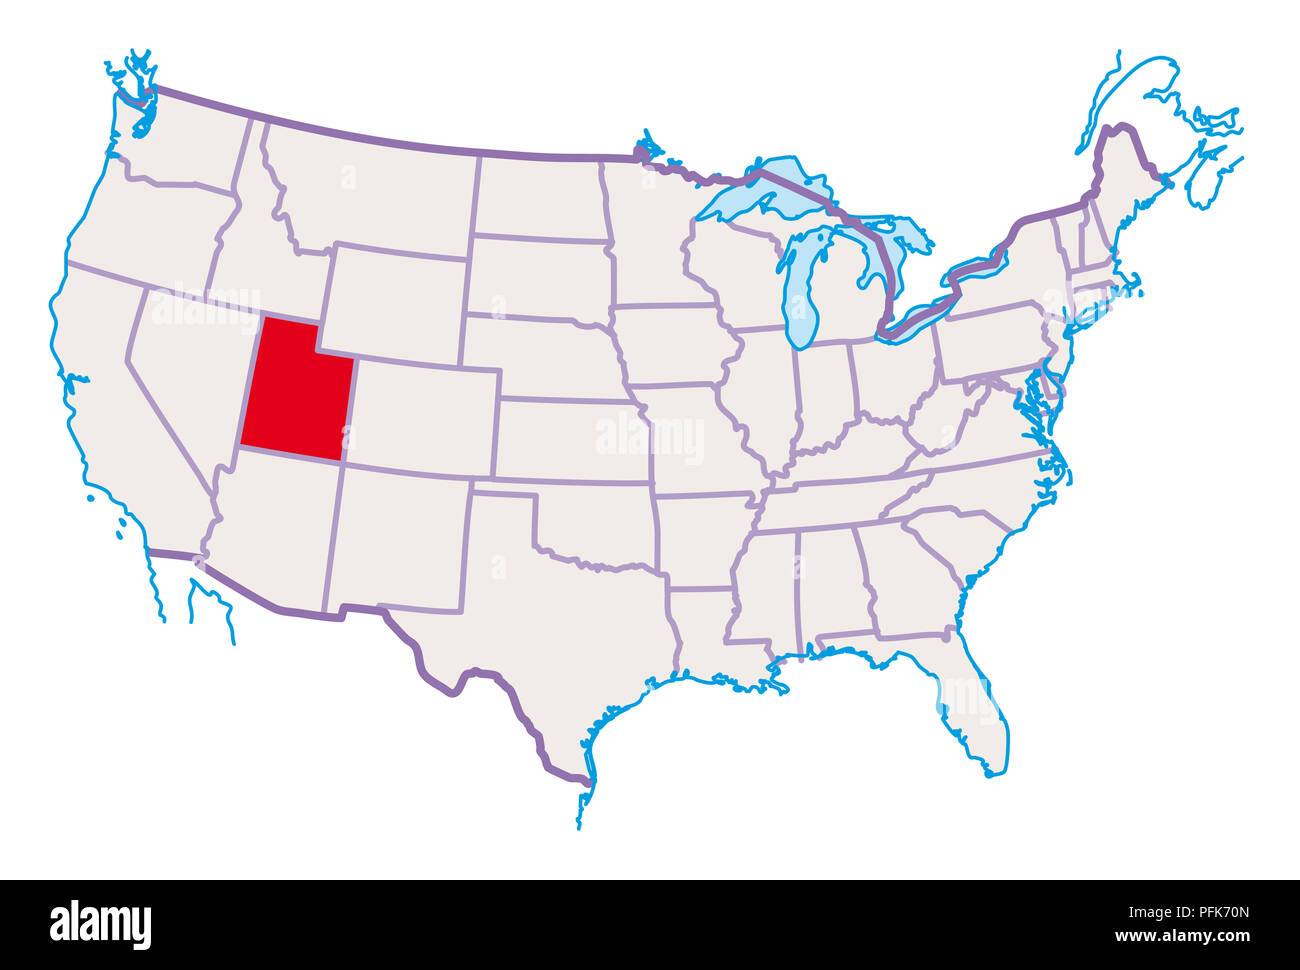 Map Of Usa Utah Highlighted In Red Stock Photo 216166853 Alamy